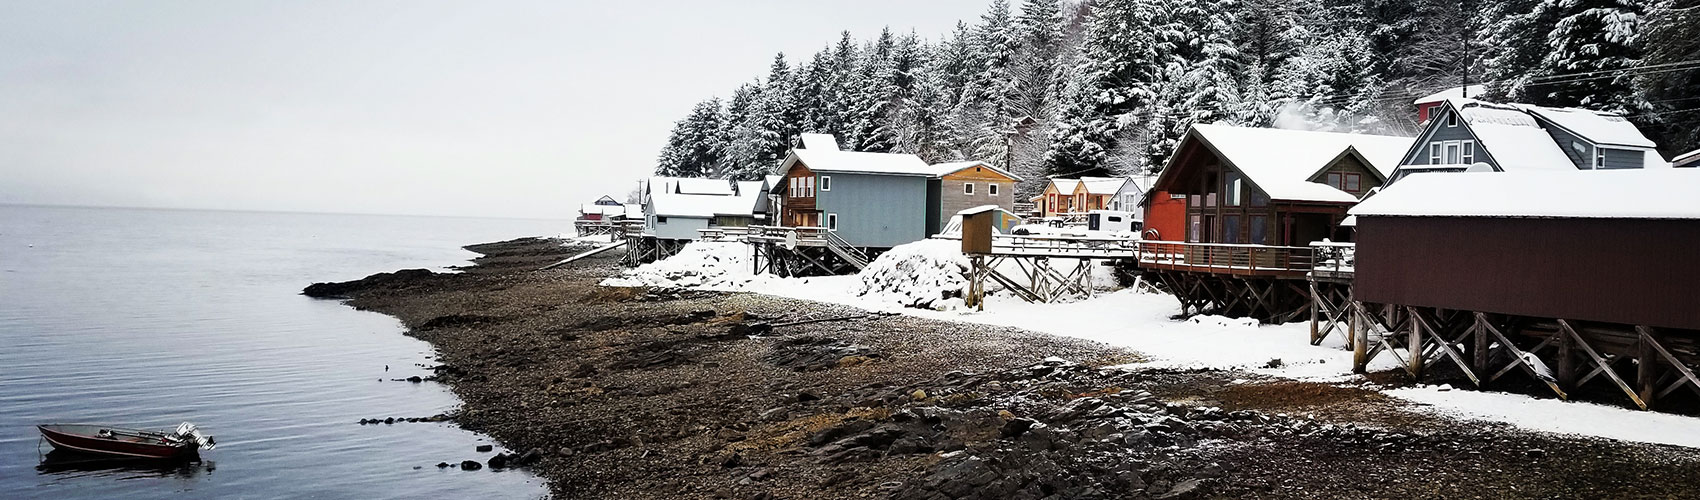 The community of Tenakee Alaska, covered in snow.